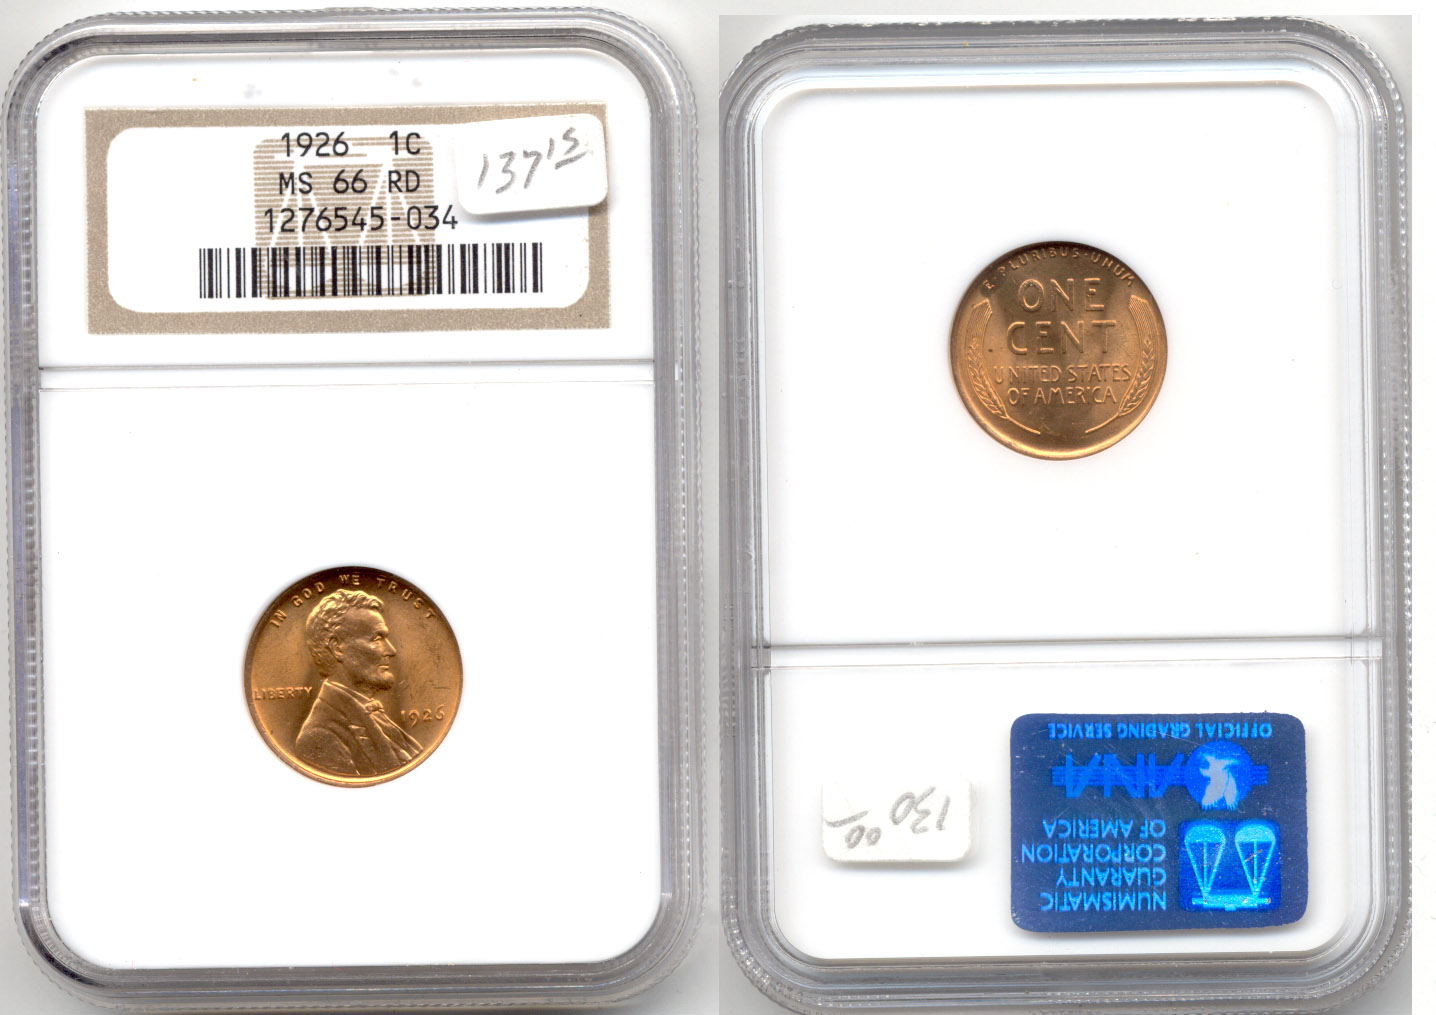 1926 Lincoln Cent NGC MS-66 Red